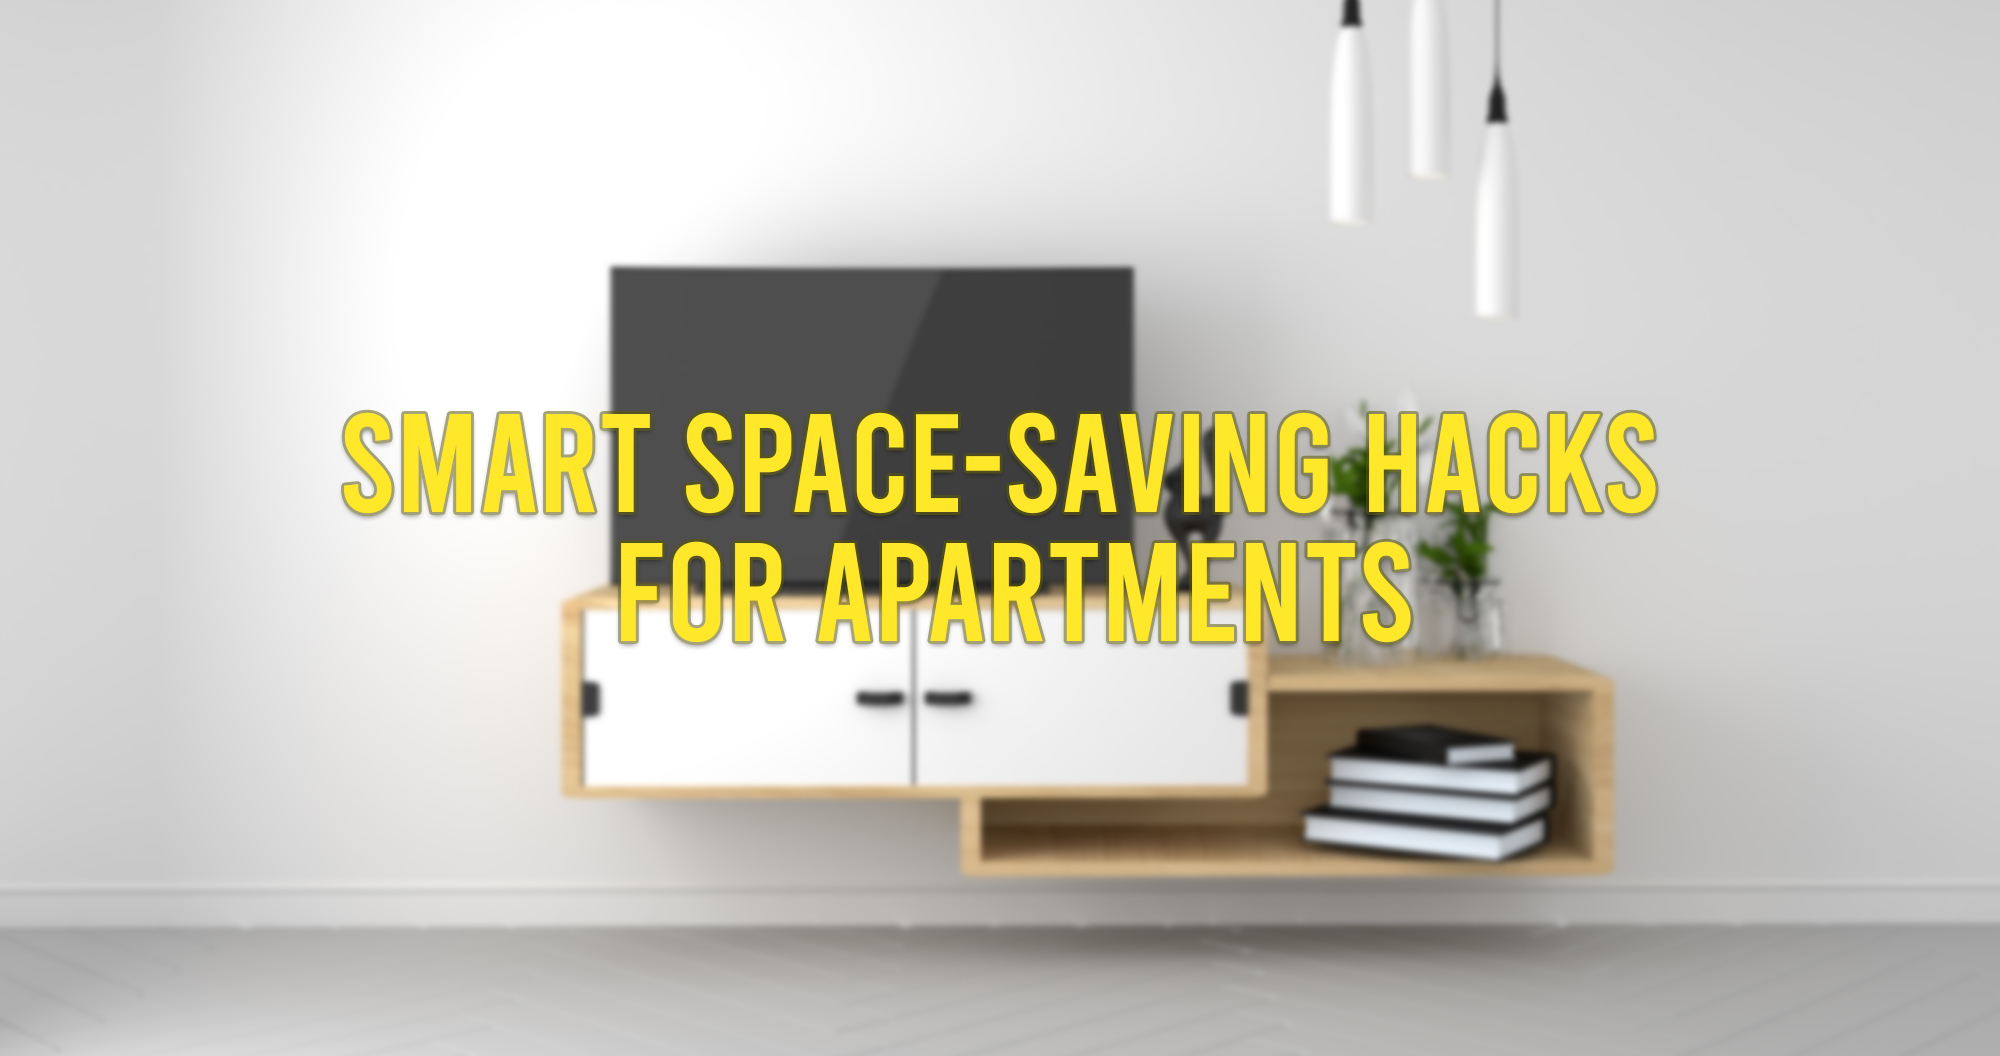 Smart Space-saving Hacks for apartments